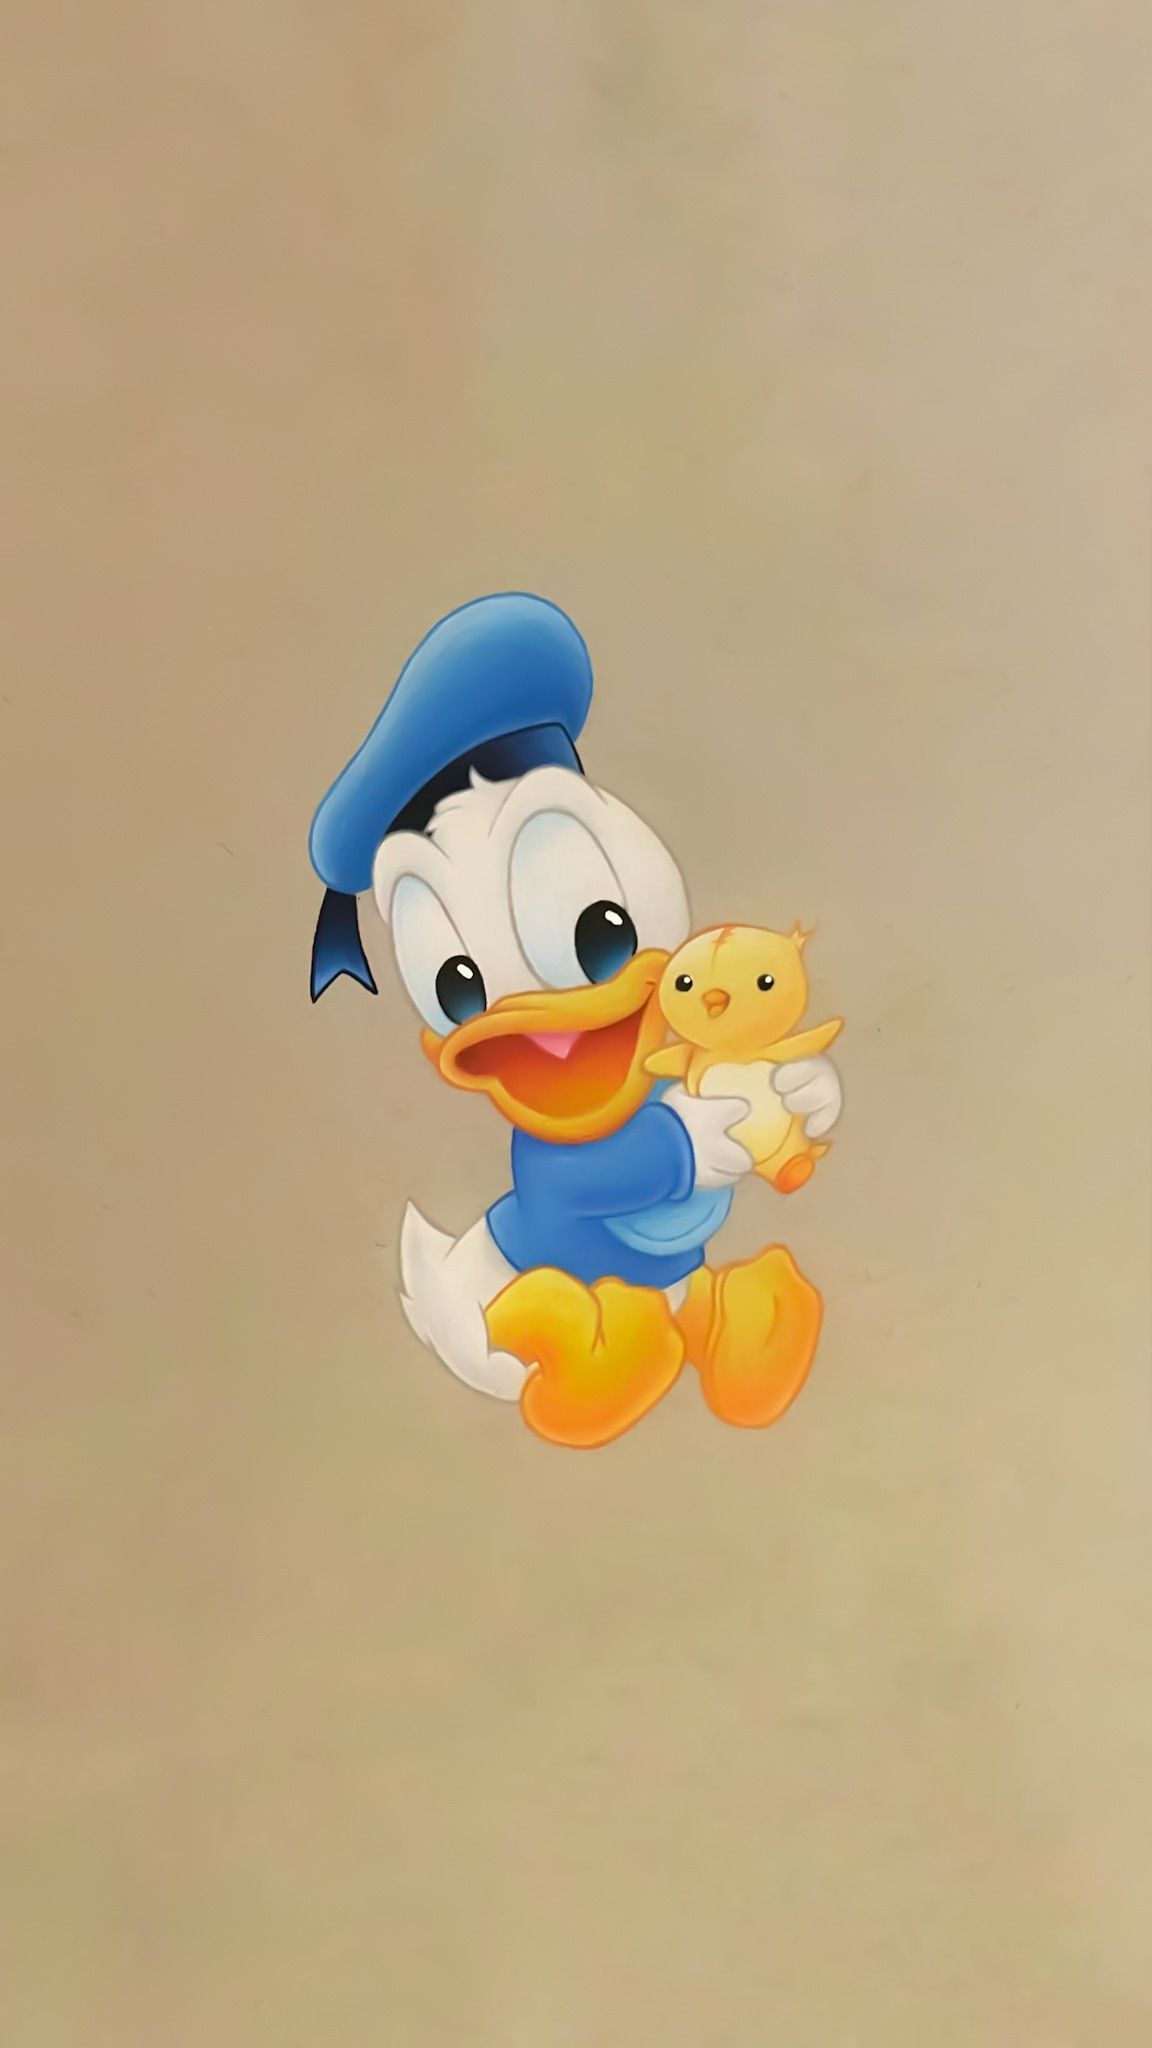 A cartoon duck with blue hat and yellow beak - Duck